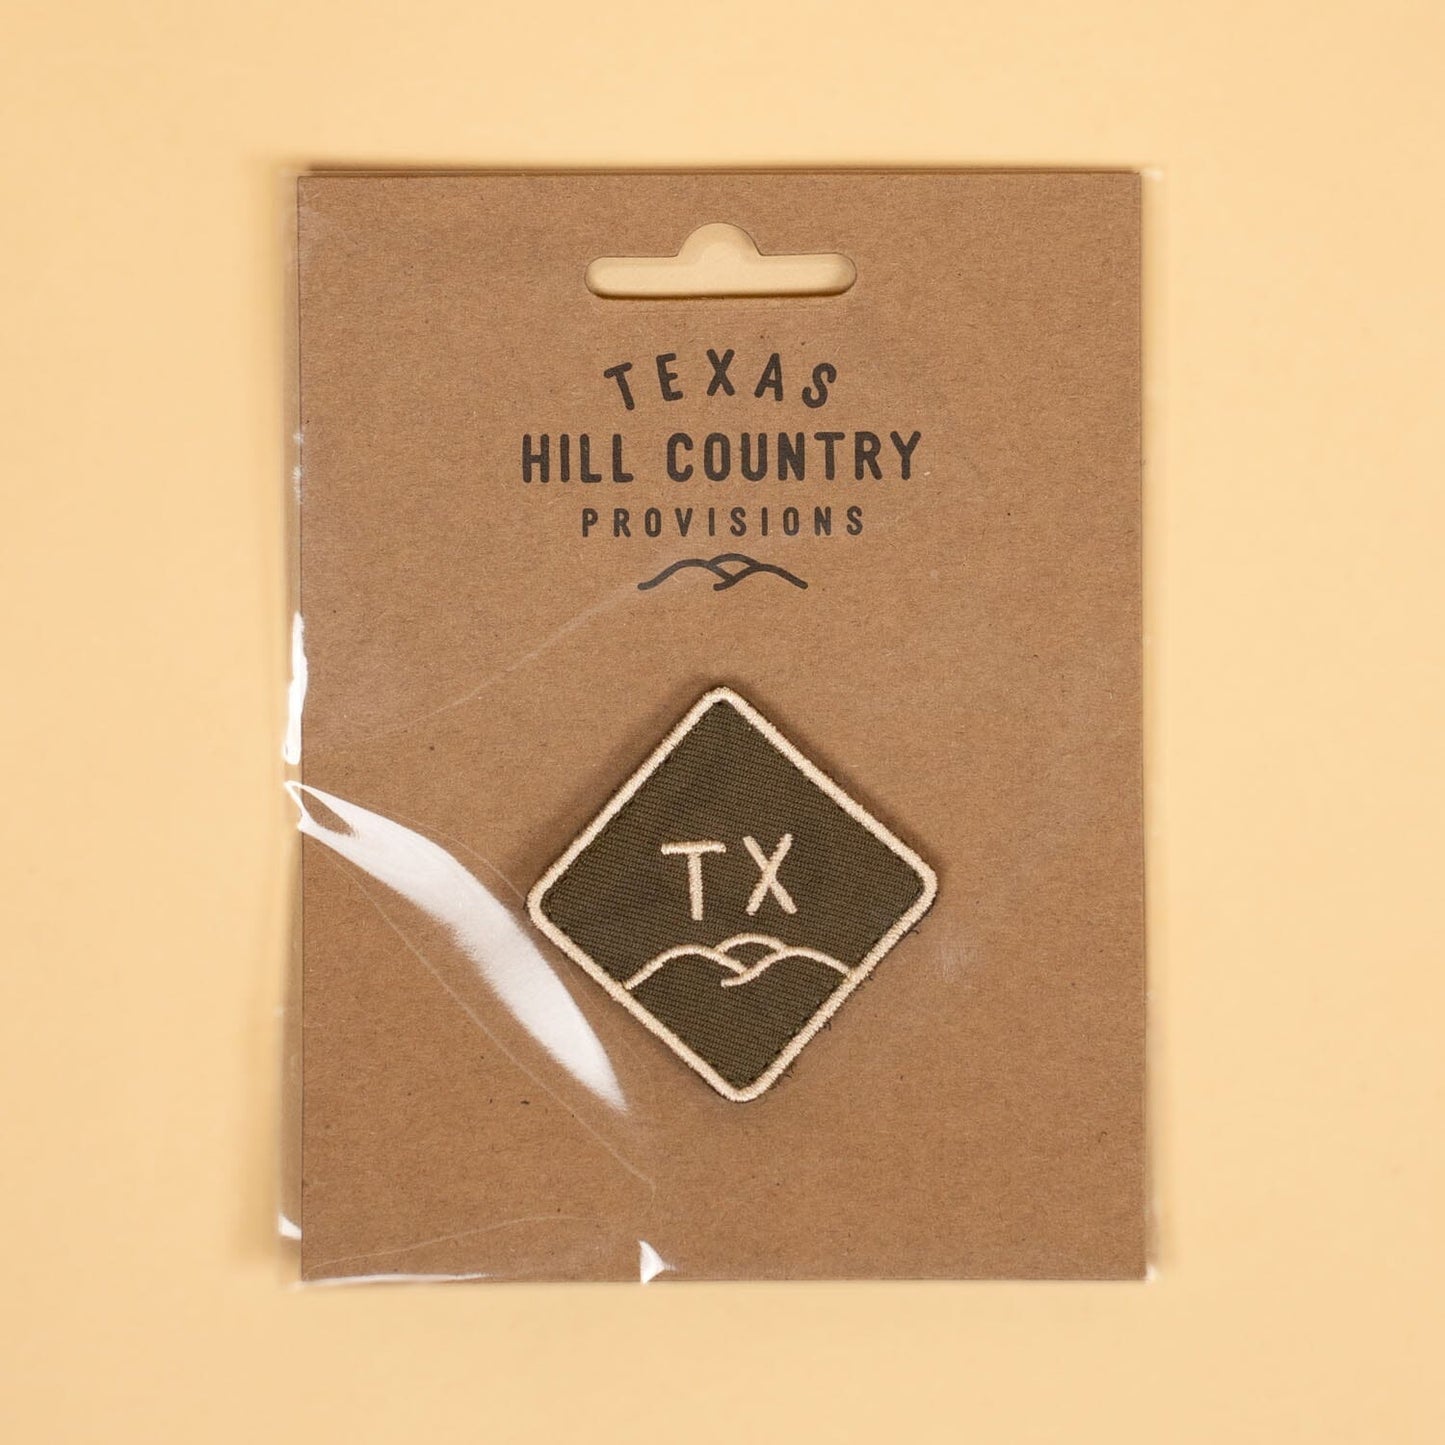 TX Hills Diamond Patch Texas Hill Country Provisions 